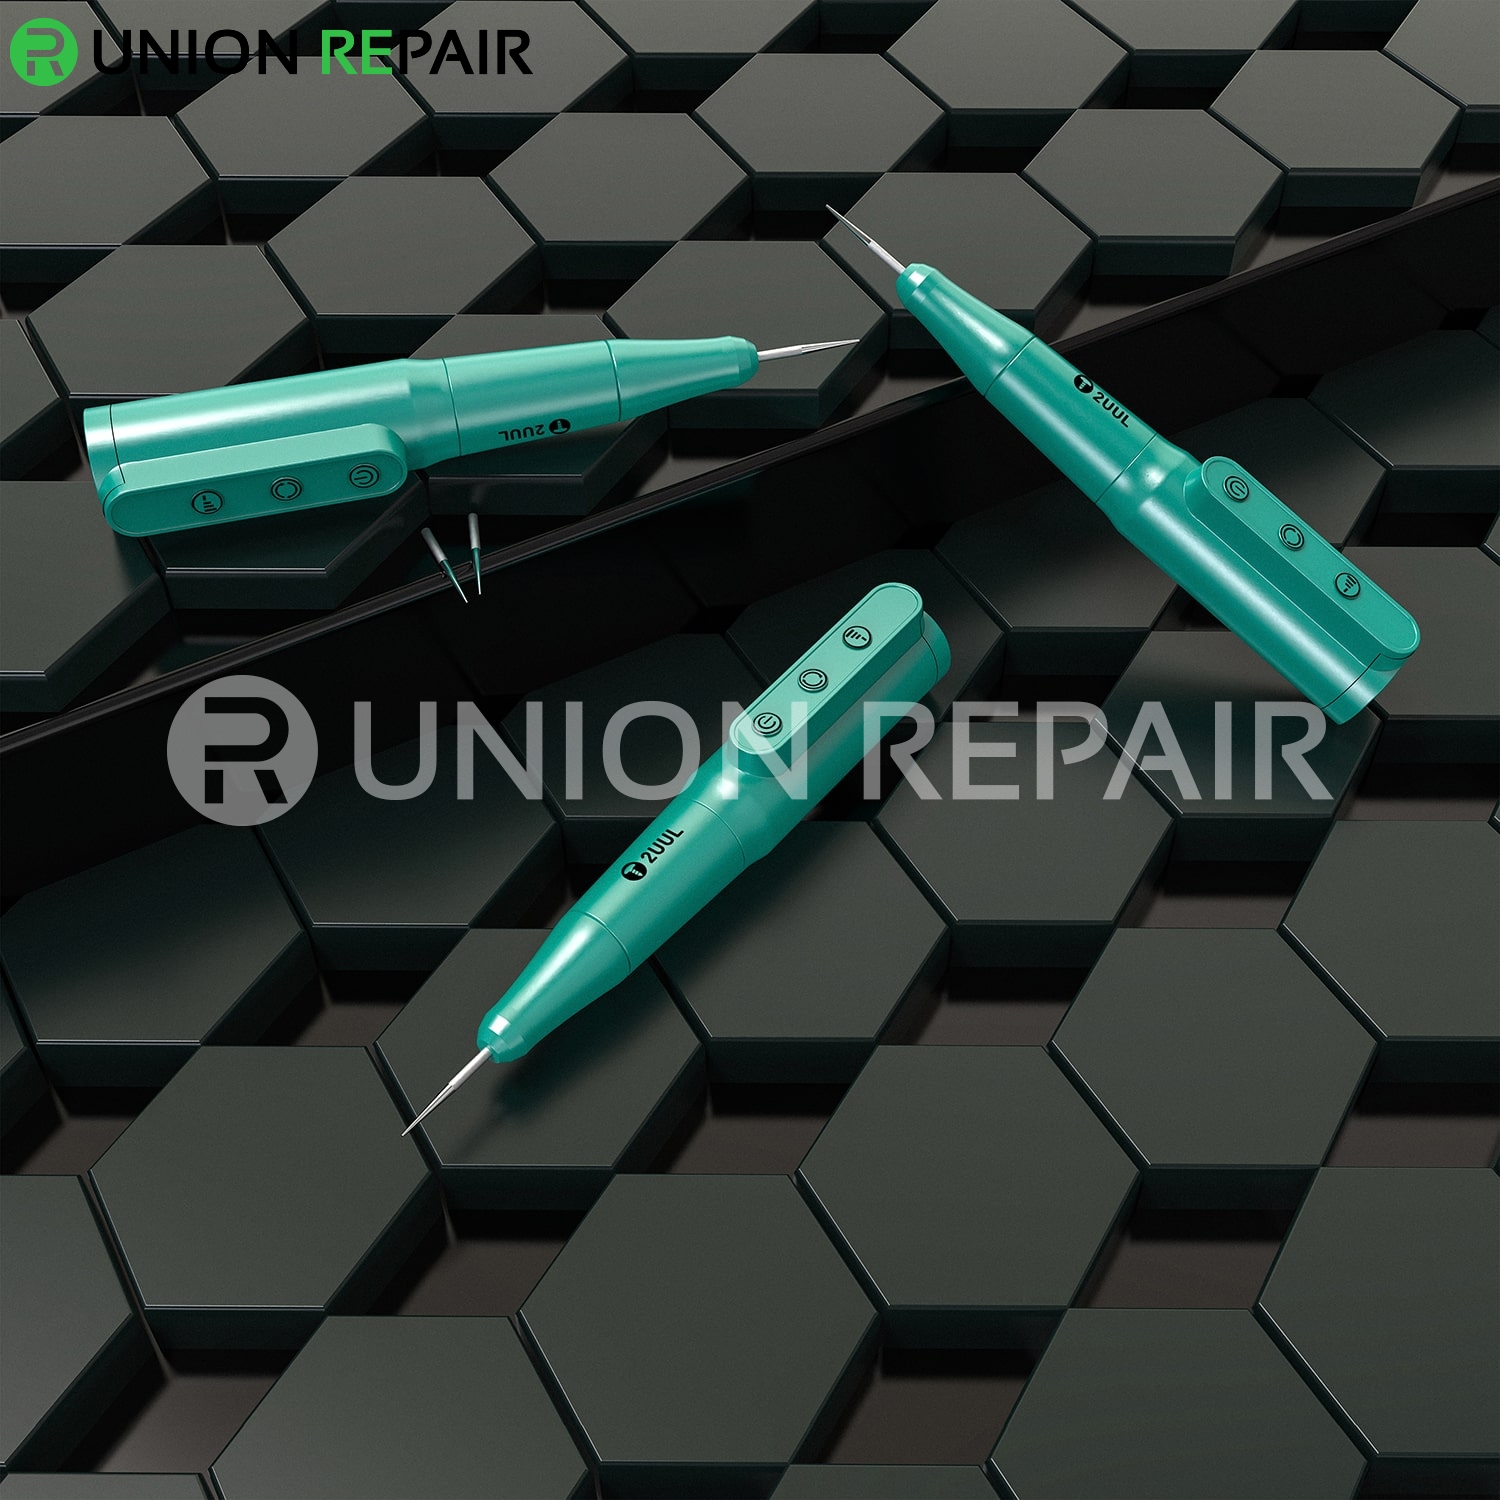 2UUL Chargeable Polish Pen for Phone Repair